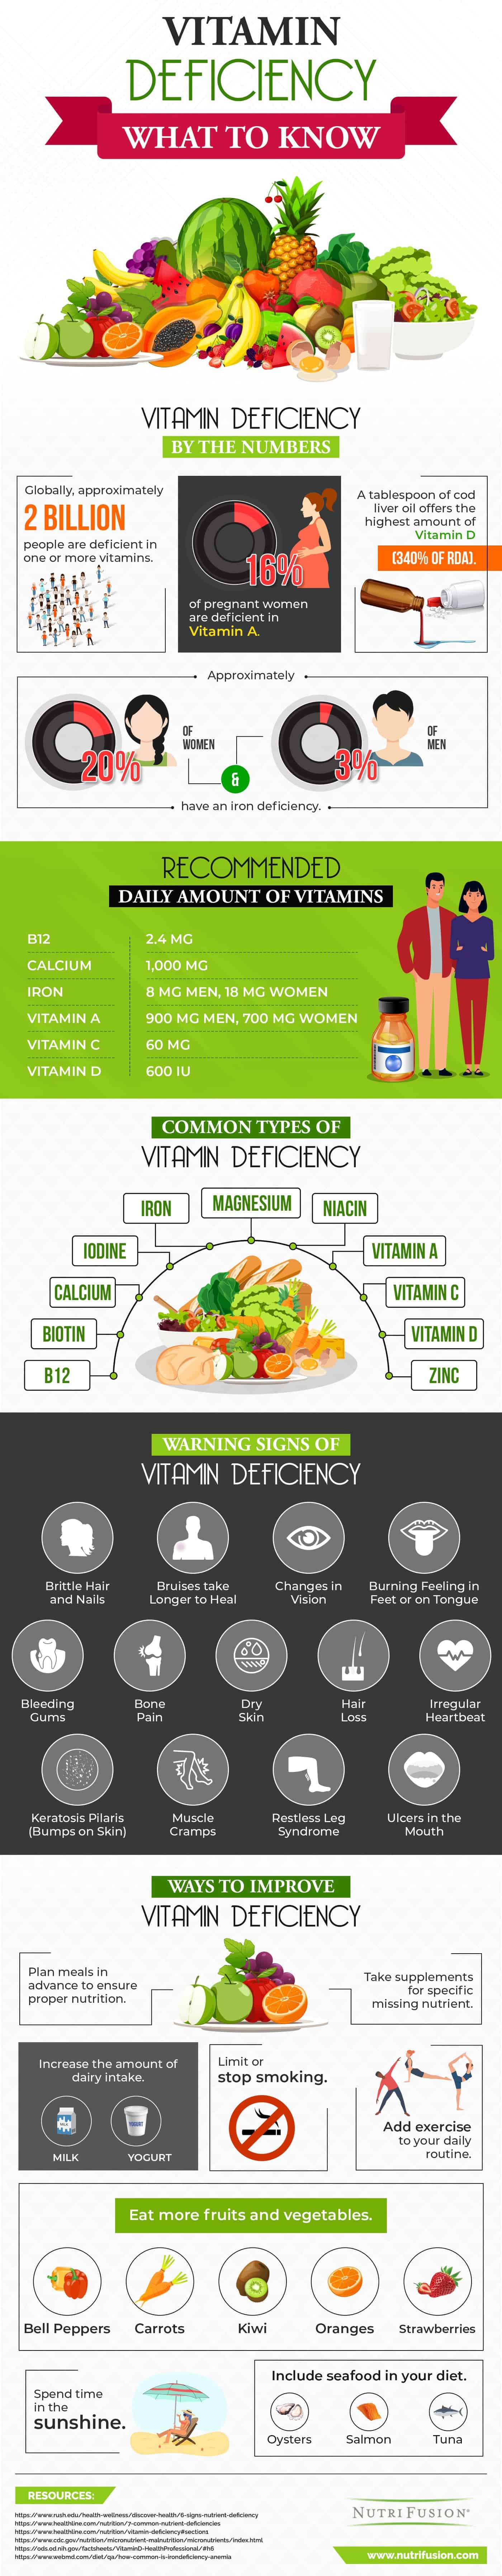 What to Know about Vitamin Deficiency